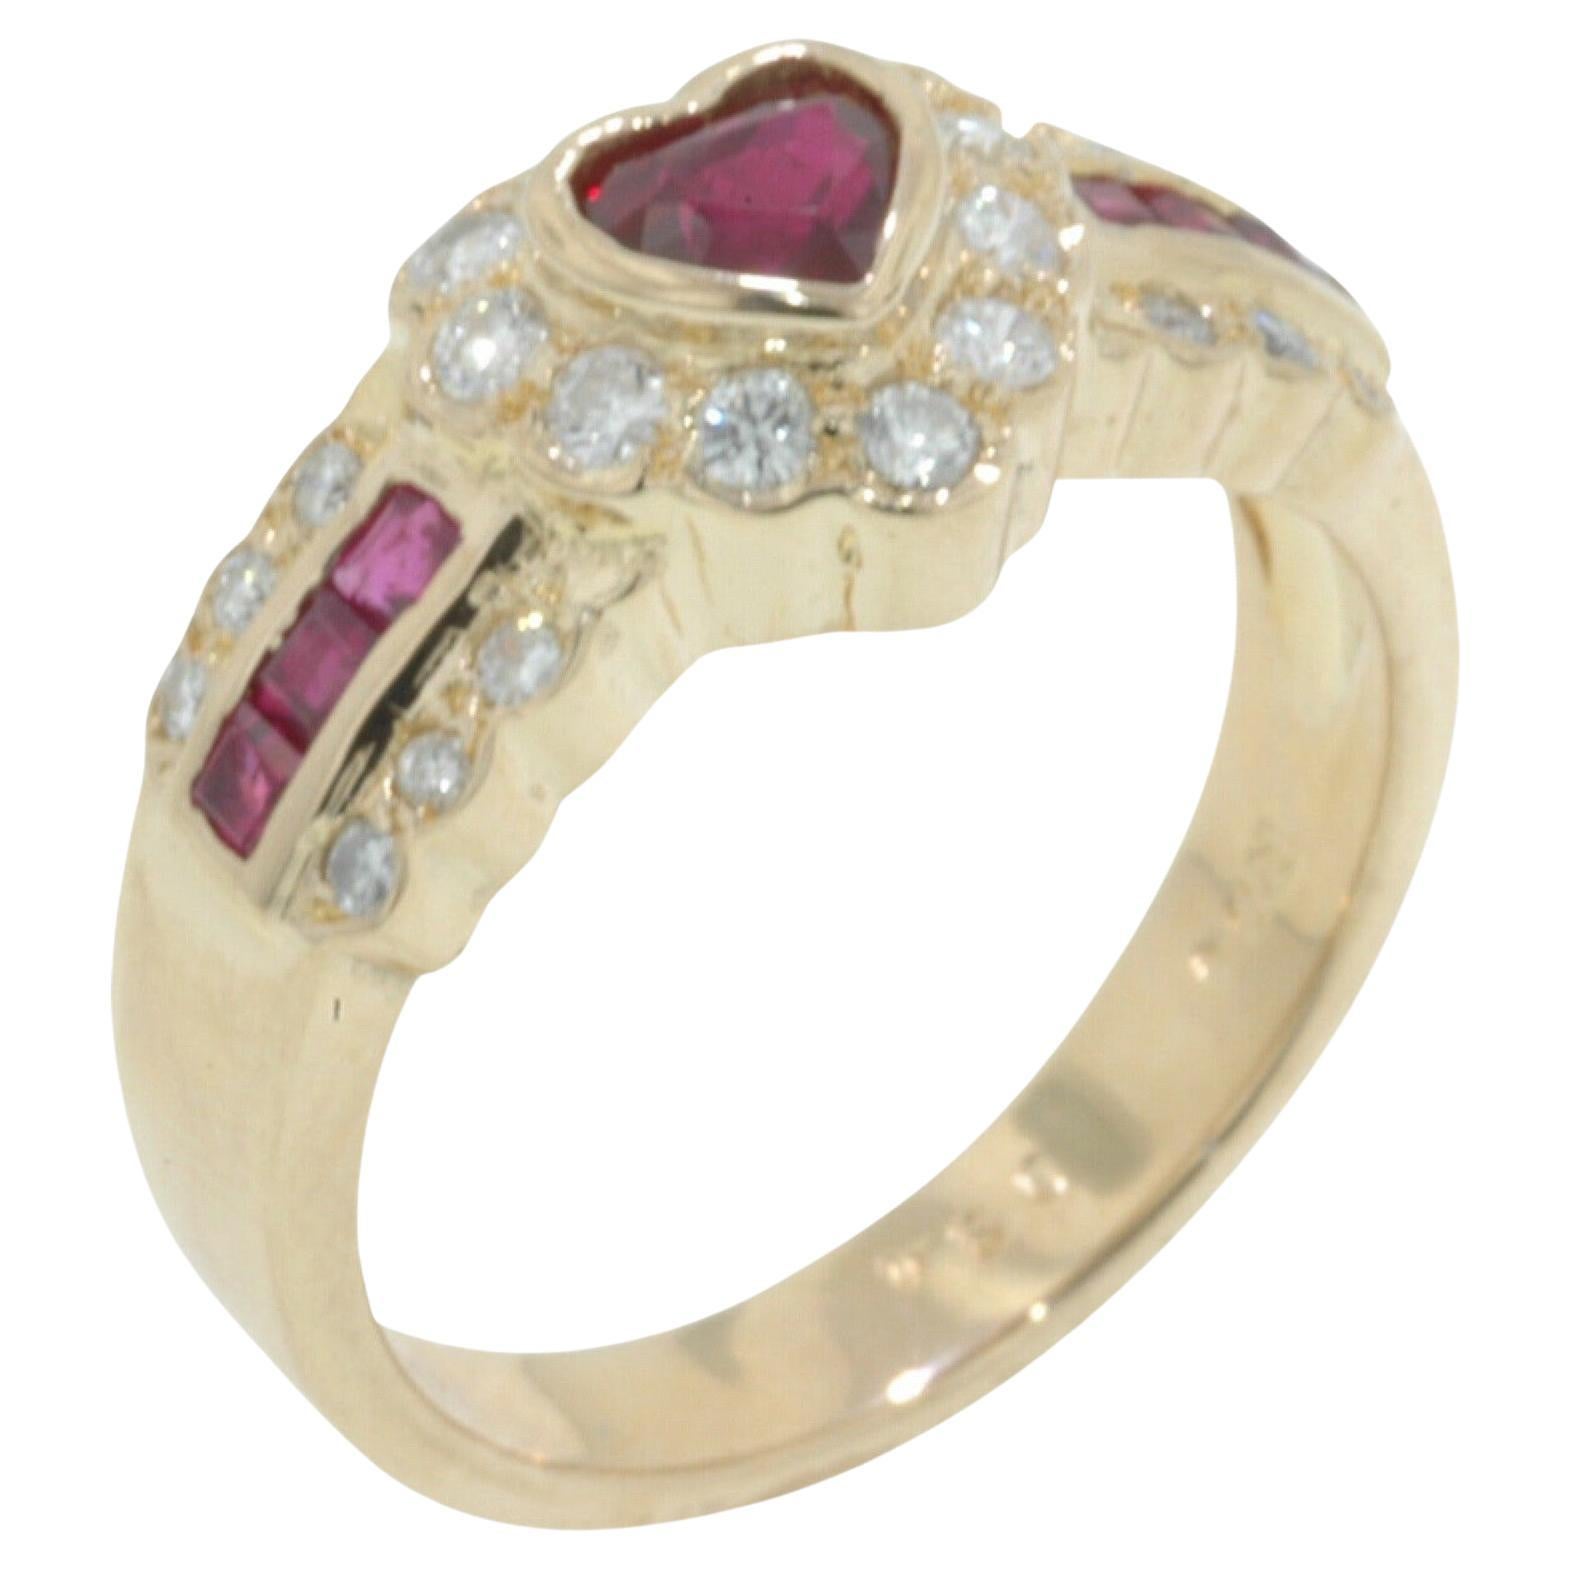 Heart Shaped Ruby Rings - 10 For Sale on 1stDibs